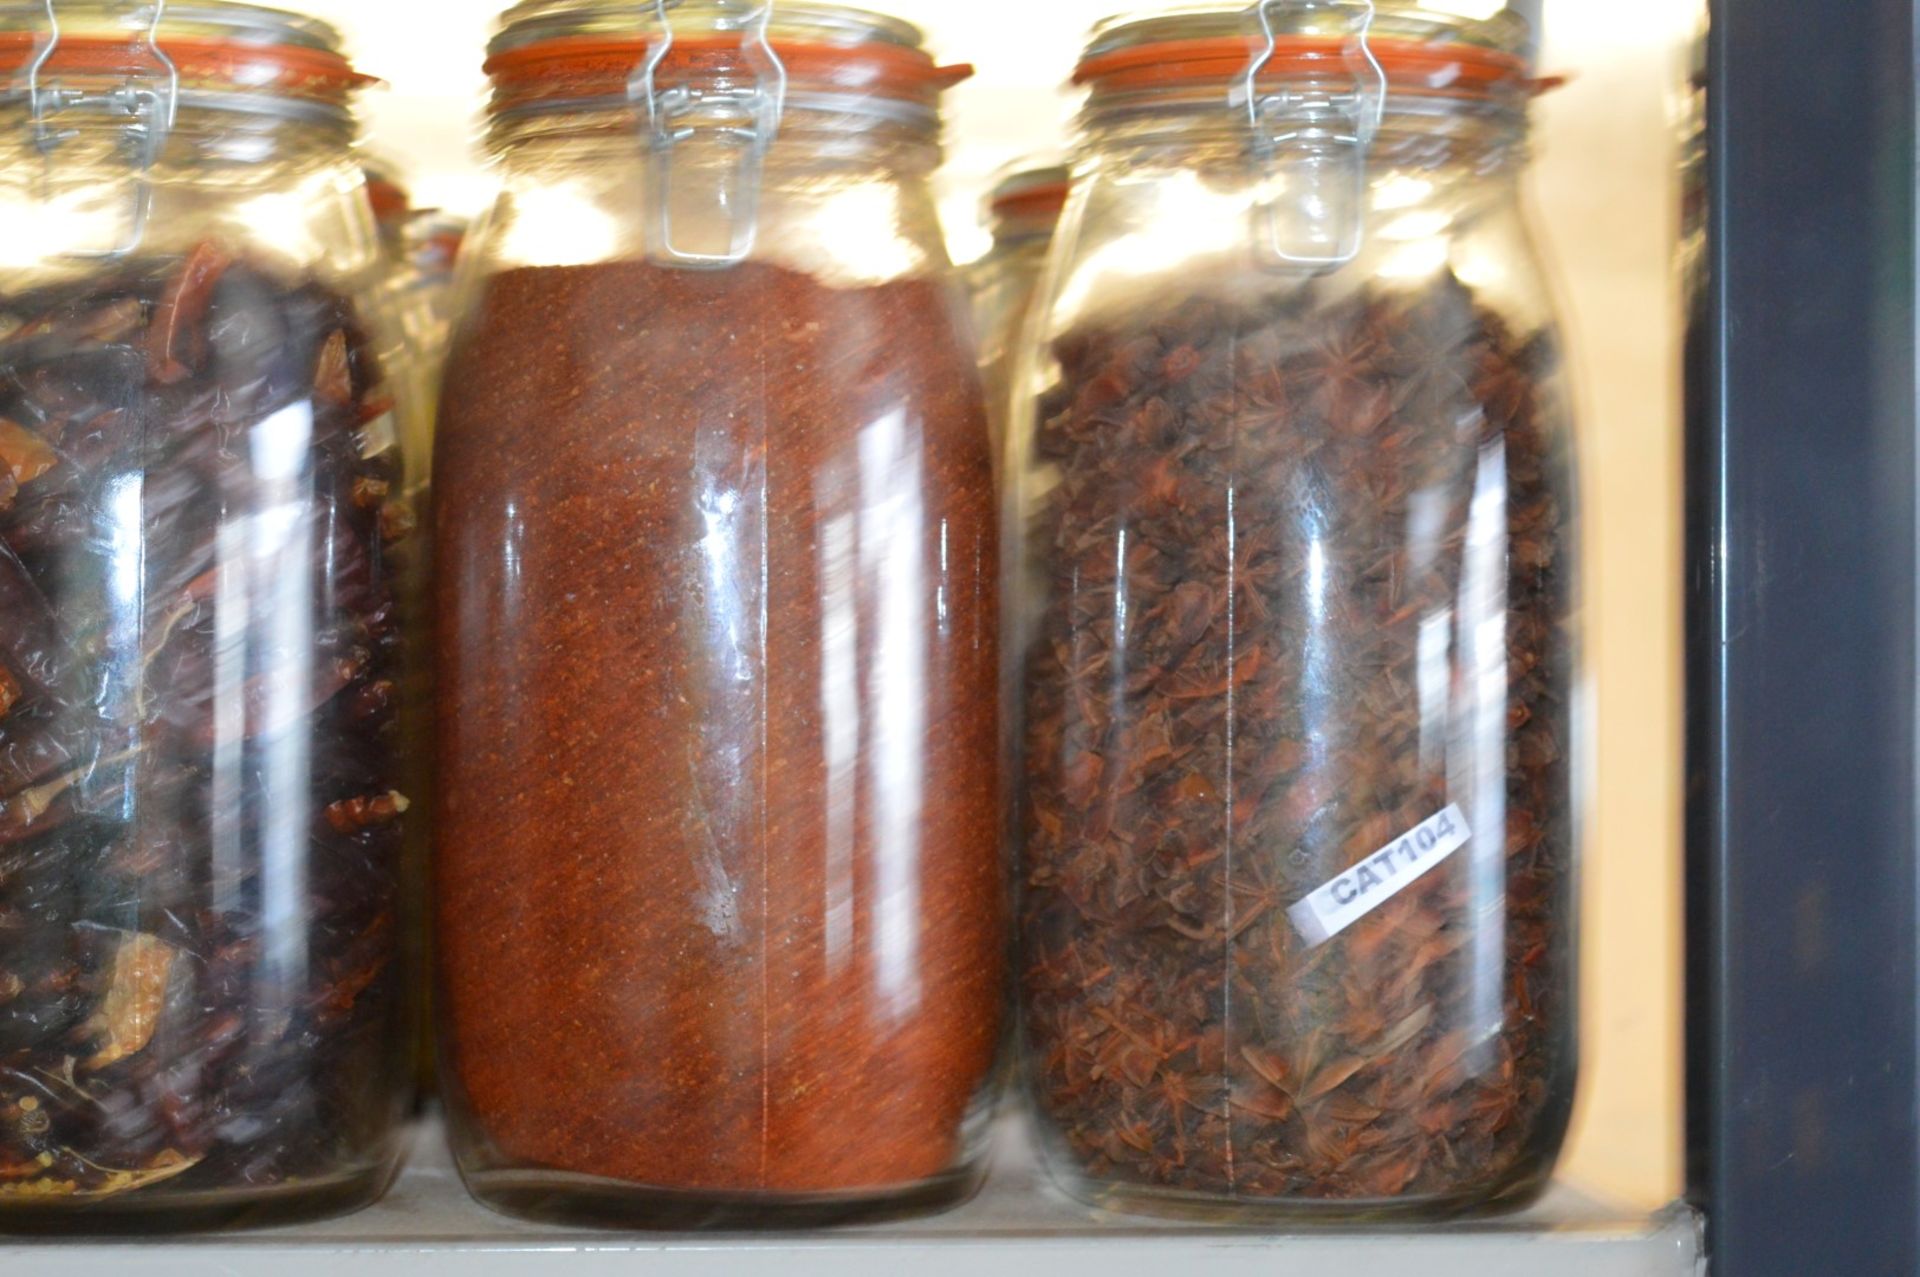 10 x Swing Top Jars With Deorative Spice Contents - Large Jars With Swing Top Lids - Size 28cm - Image 7 of 7